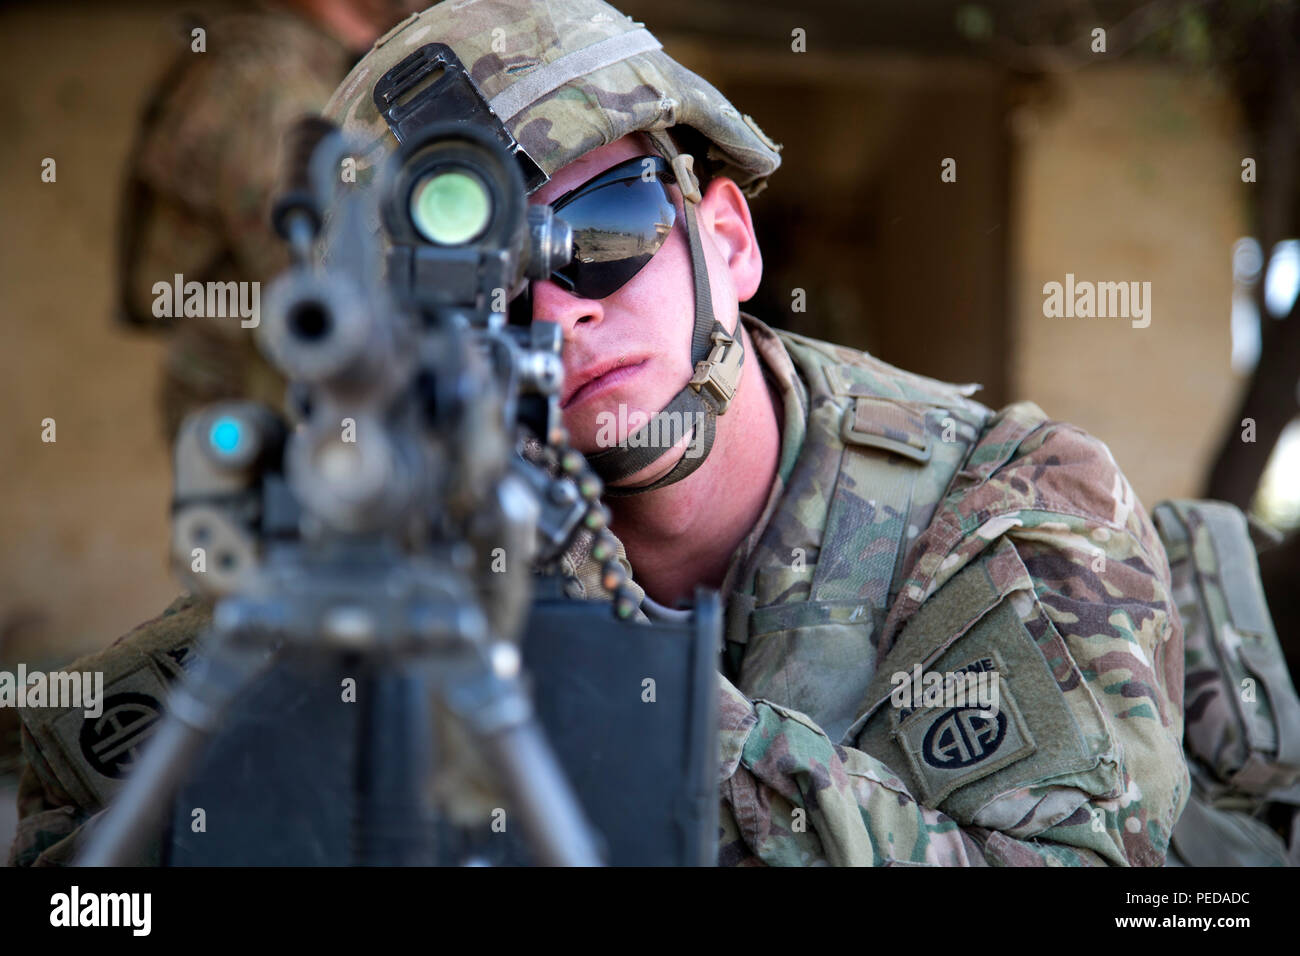 U.S. Army Pfc. Eric Krussier, a paratrooper assigned to Bravo Troop, 5th Squadron, 73rd Cavalry Regiment, 3rd Brigade, 82nd Airborne Division, looks down his sights of his weapon while he pulls security during squad level training at Camp Taji, Iraq, Aug. 3, 2015. Coalition forces routinely practice what they plan to teach Iraqi soldiers prior to each round of instruction. Training at the building partner capacity sites is an integral part of Combined Joint Task Force – Operation Inherent Resolve’s multinational effort to train Iraqi security force personnel to defeat the Islamic State of Iraq Stock Photo